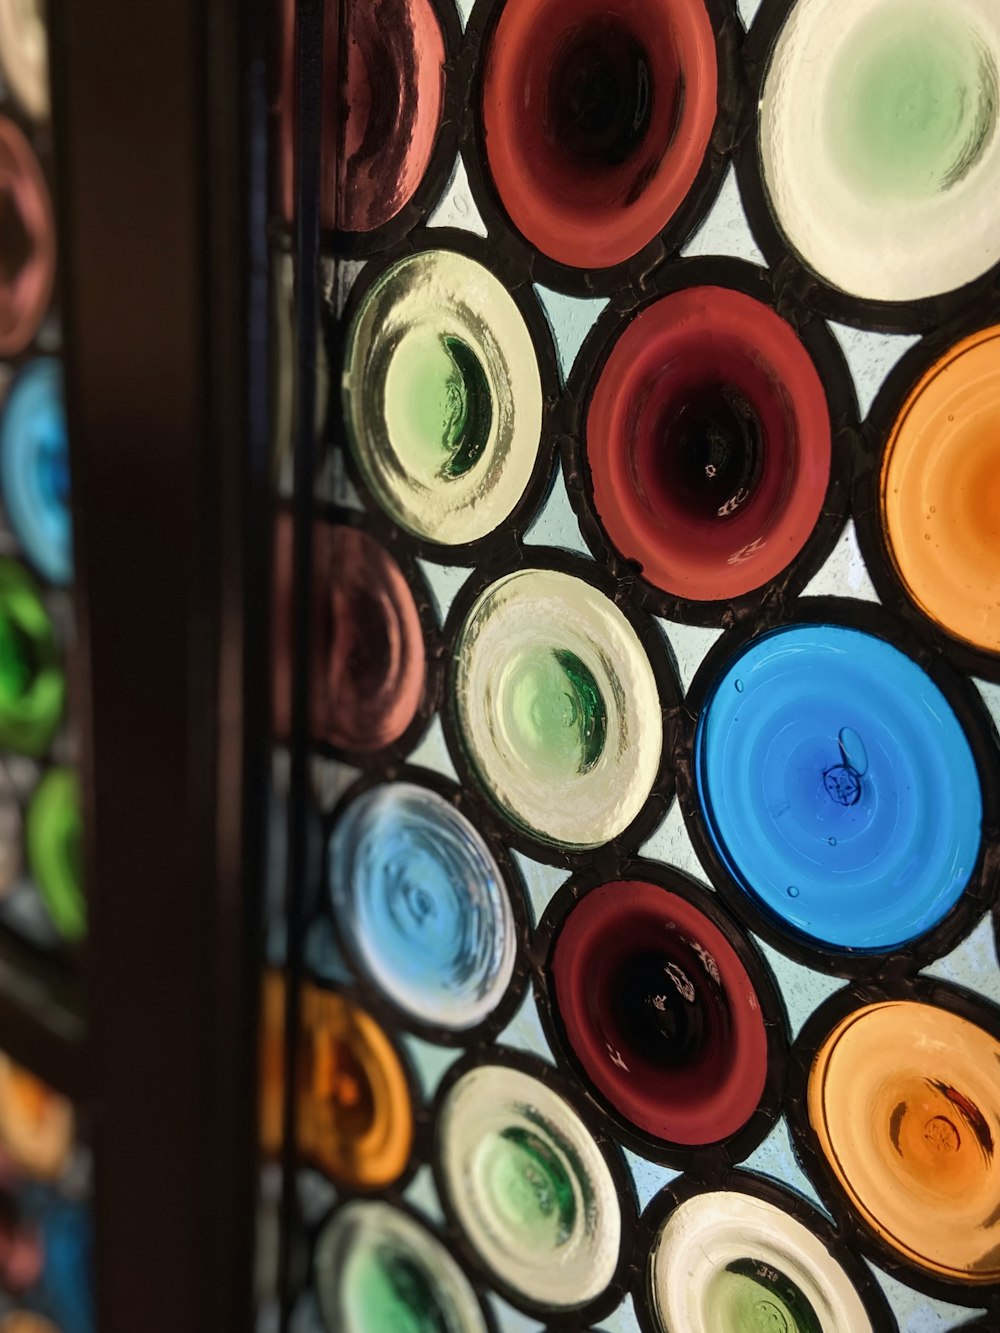 a close up of a colorful glass window